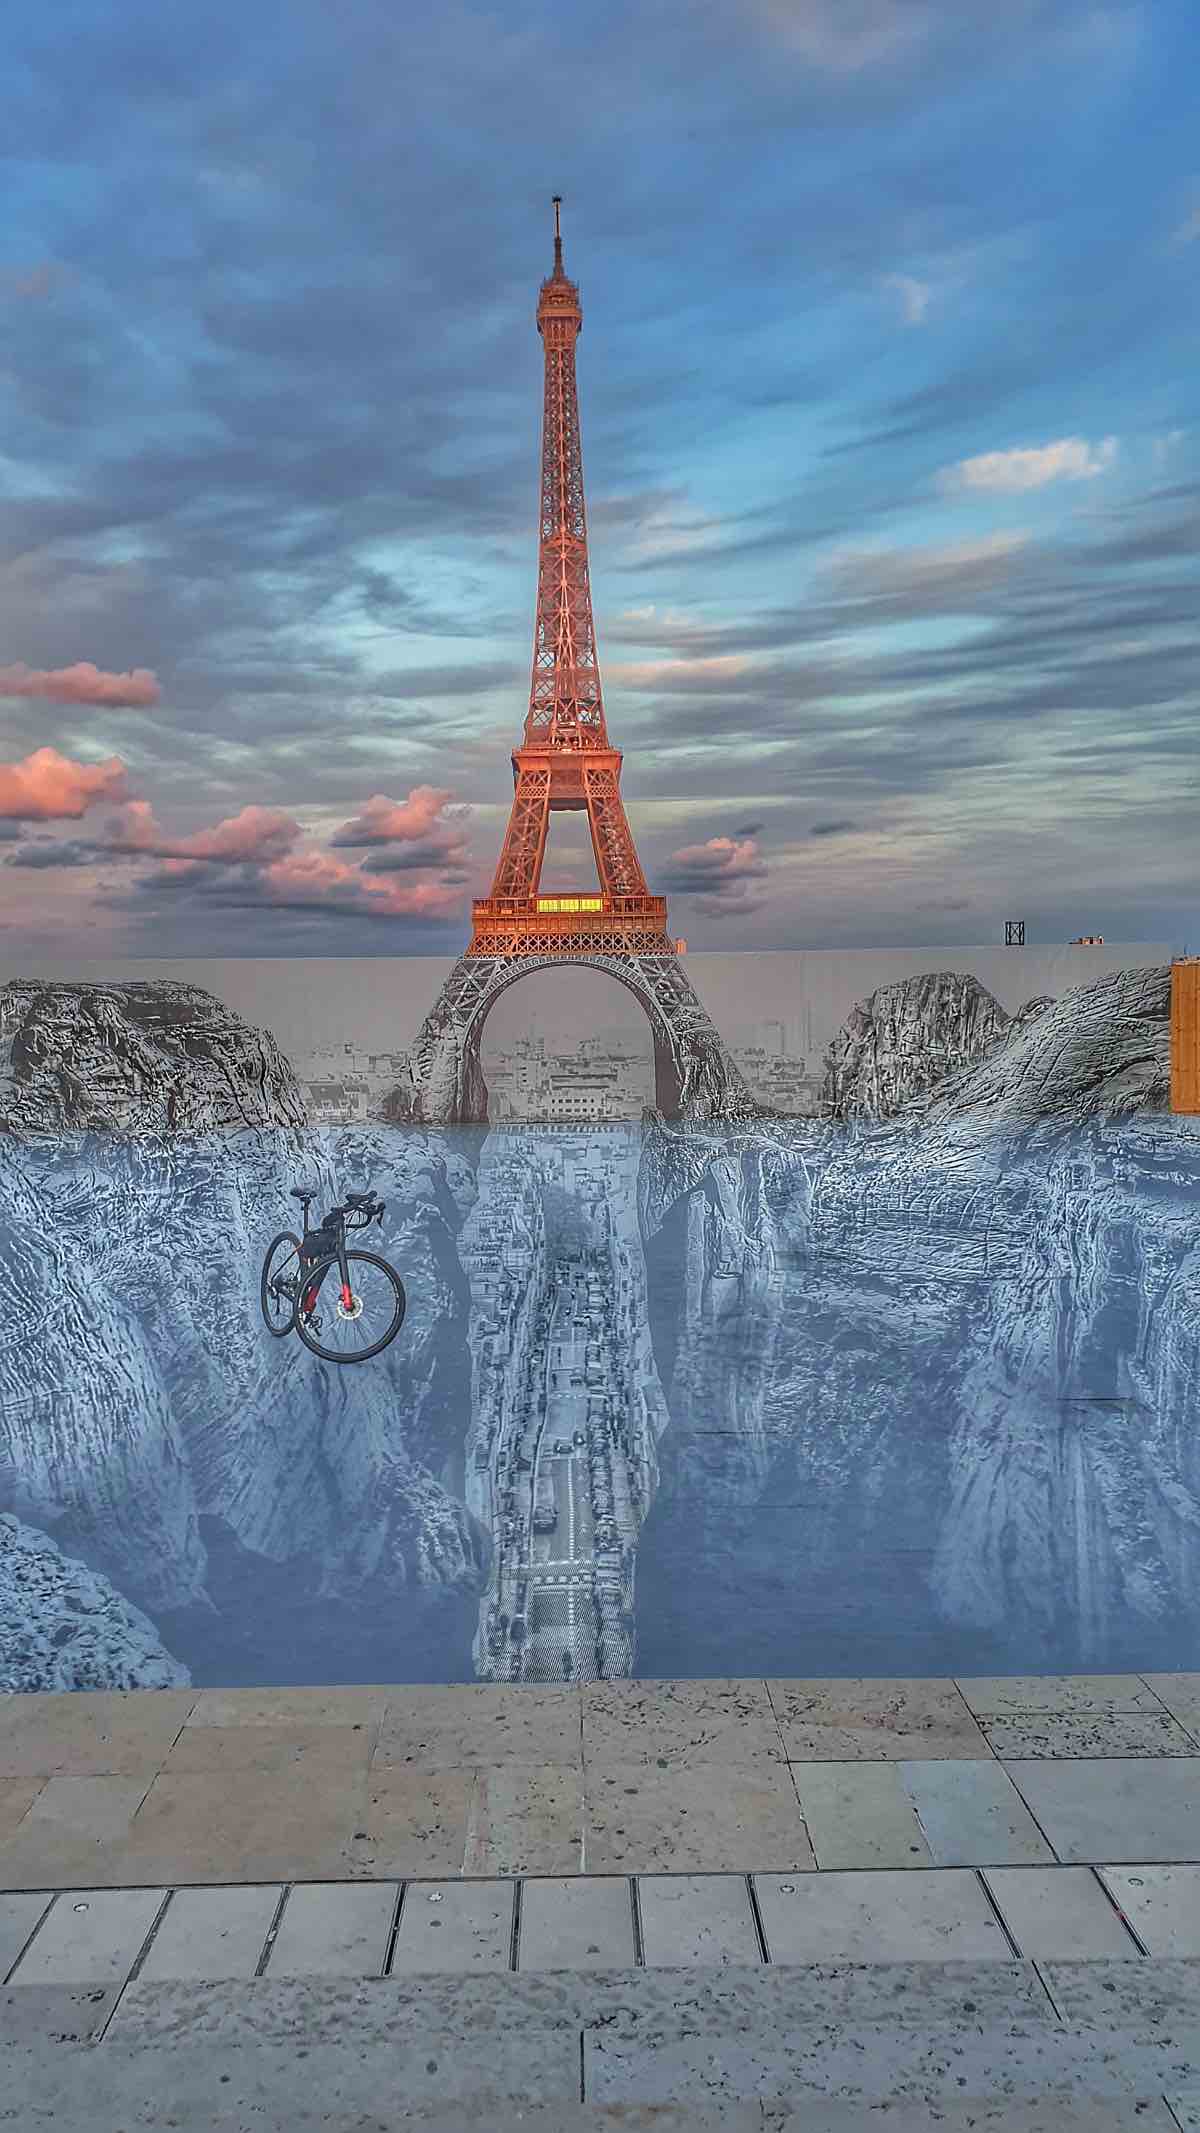 bikerumor pic of the day a specialized diverge seems to float above a scene anchored by the eiffel tower on street art created on the place du trocadero in paris france.